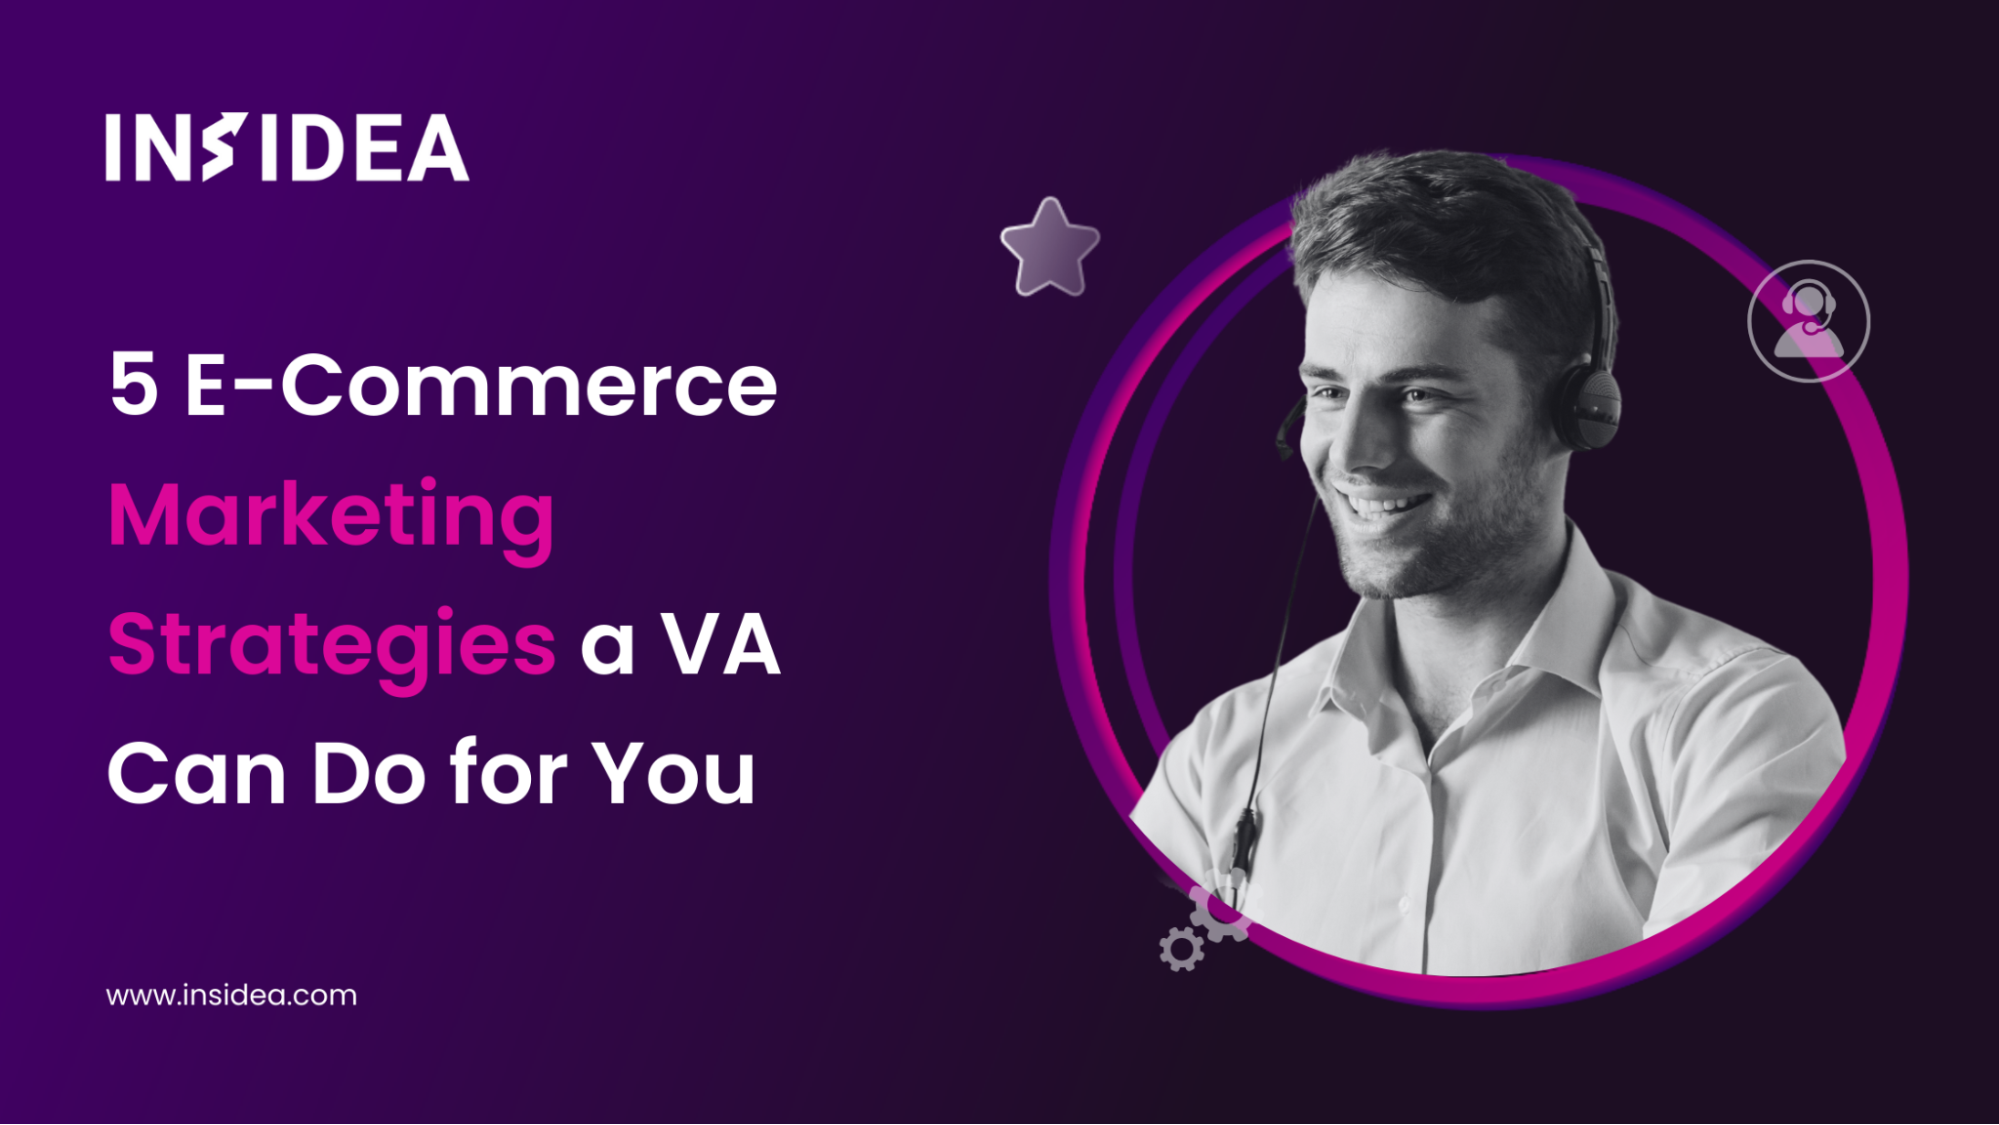 5 E-Commerce Marketing Strategies a VA Can Do for You